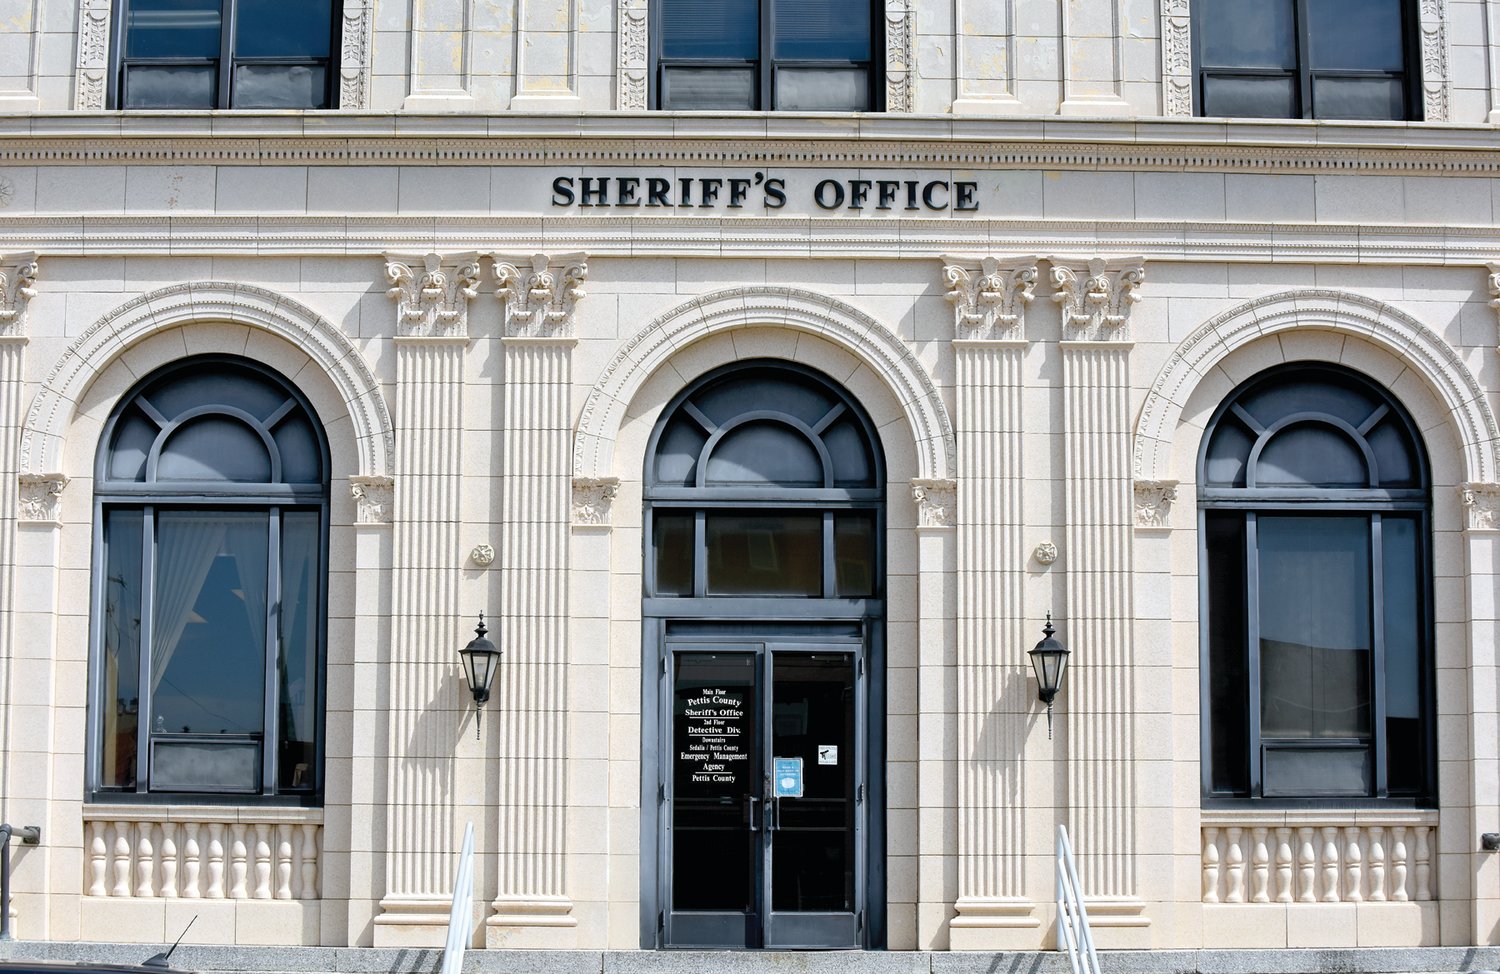 Image of Pettis County Sheriff's Office